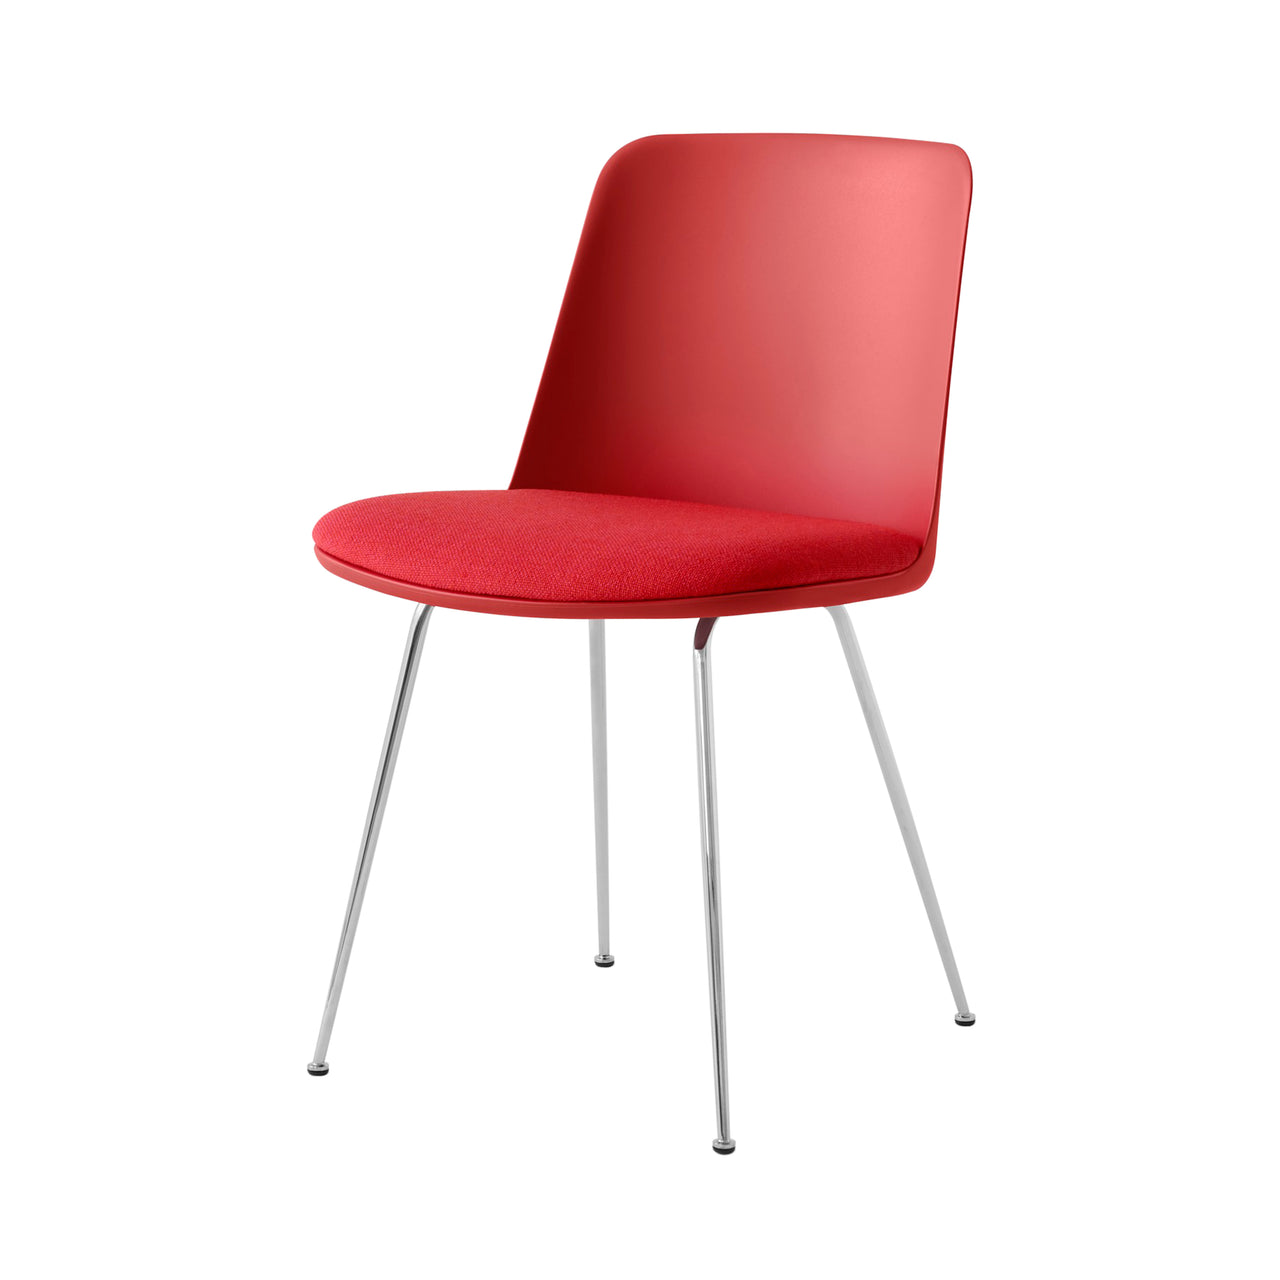 Rely Chair HW7: Chrome Base + Vermilion Red